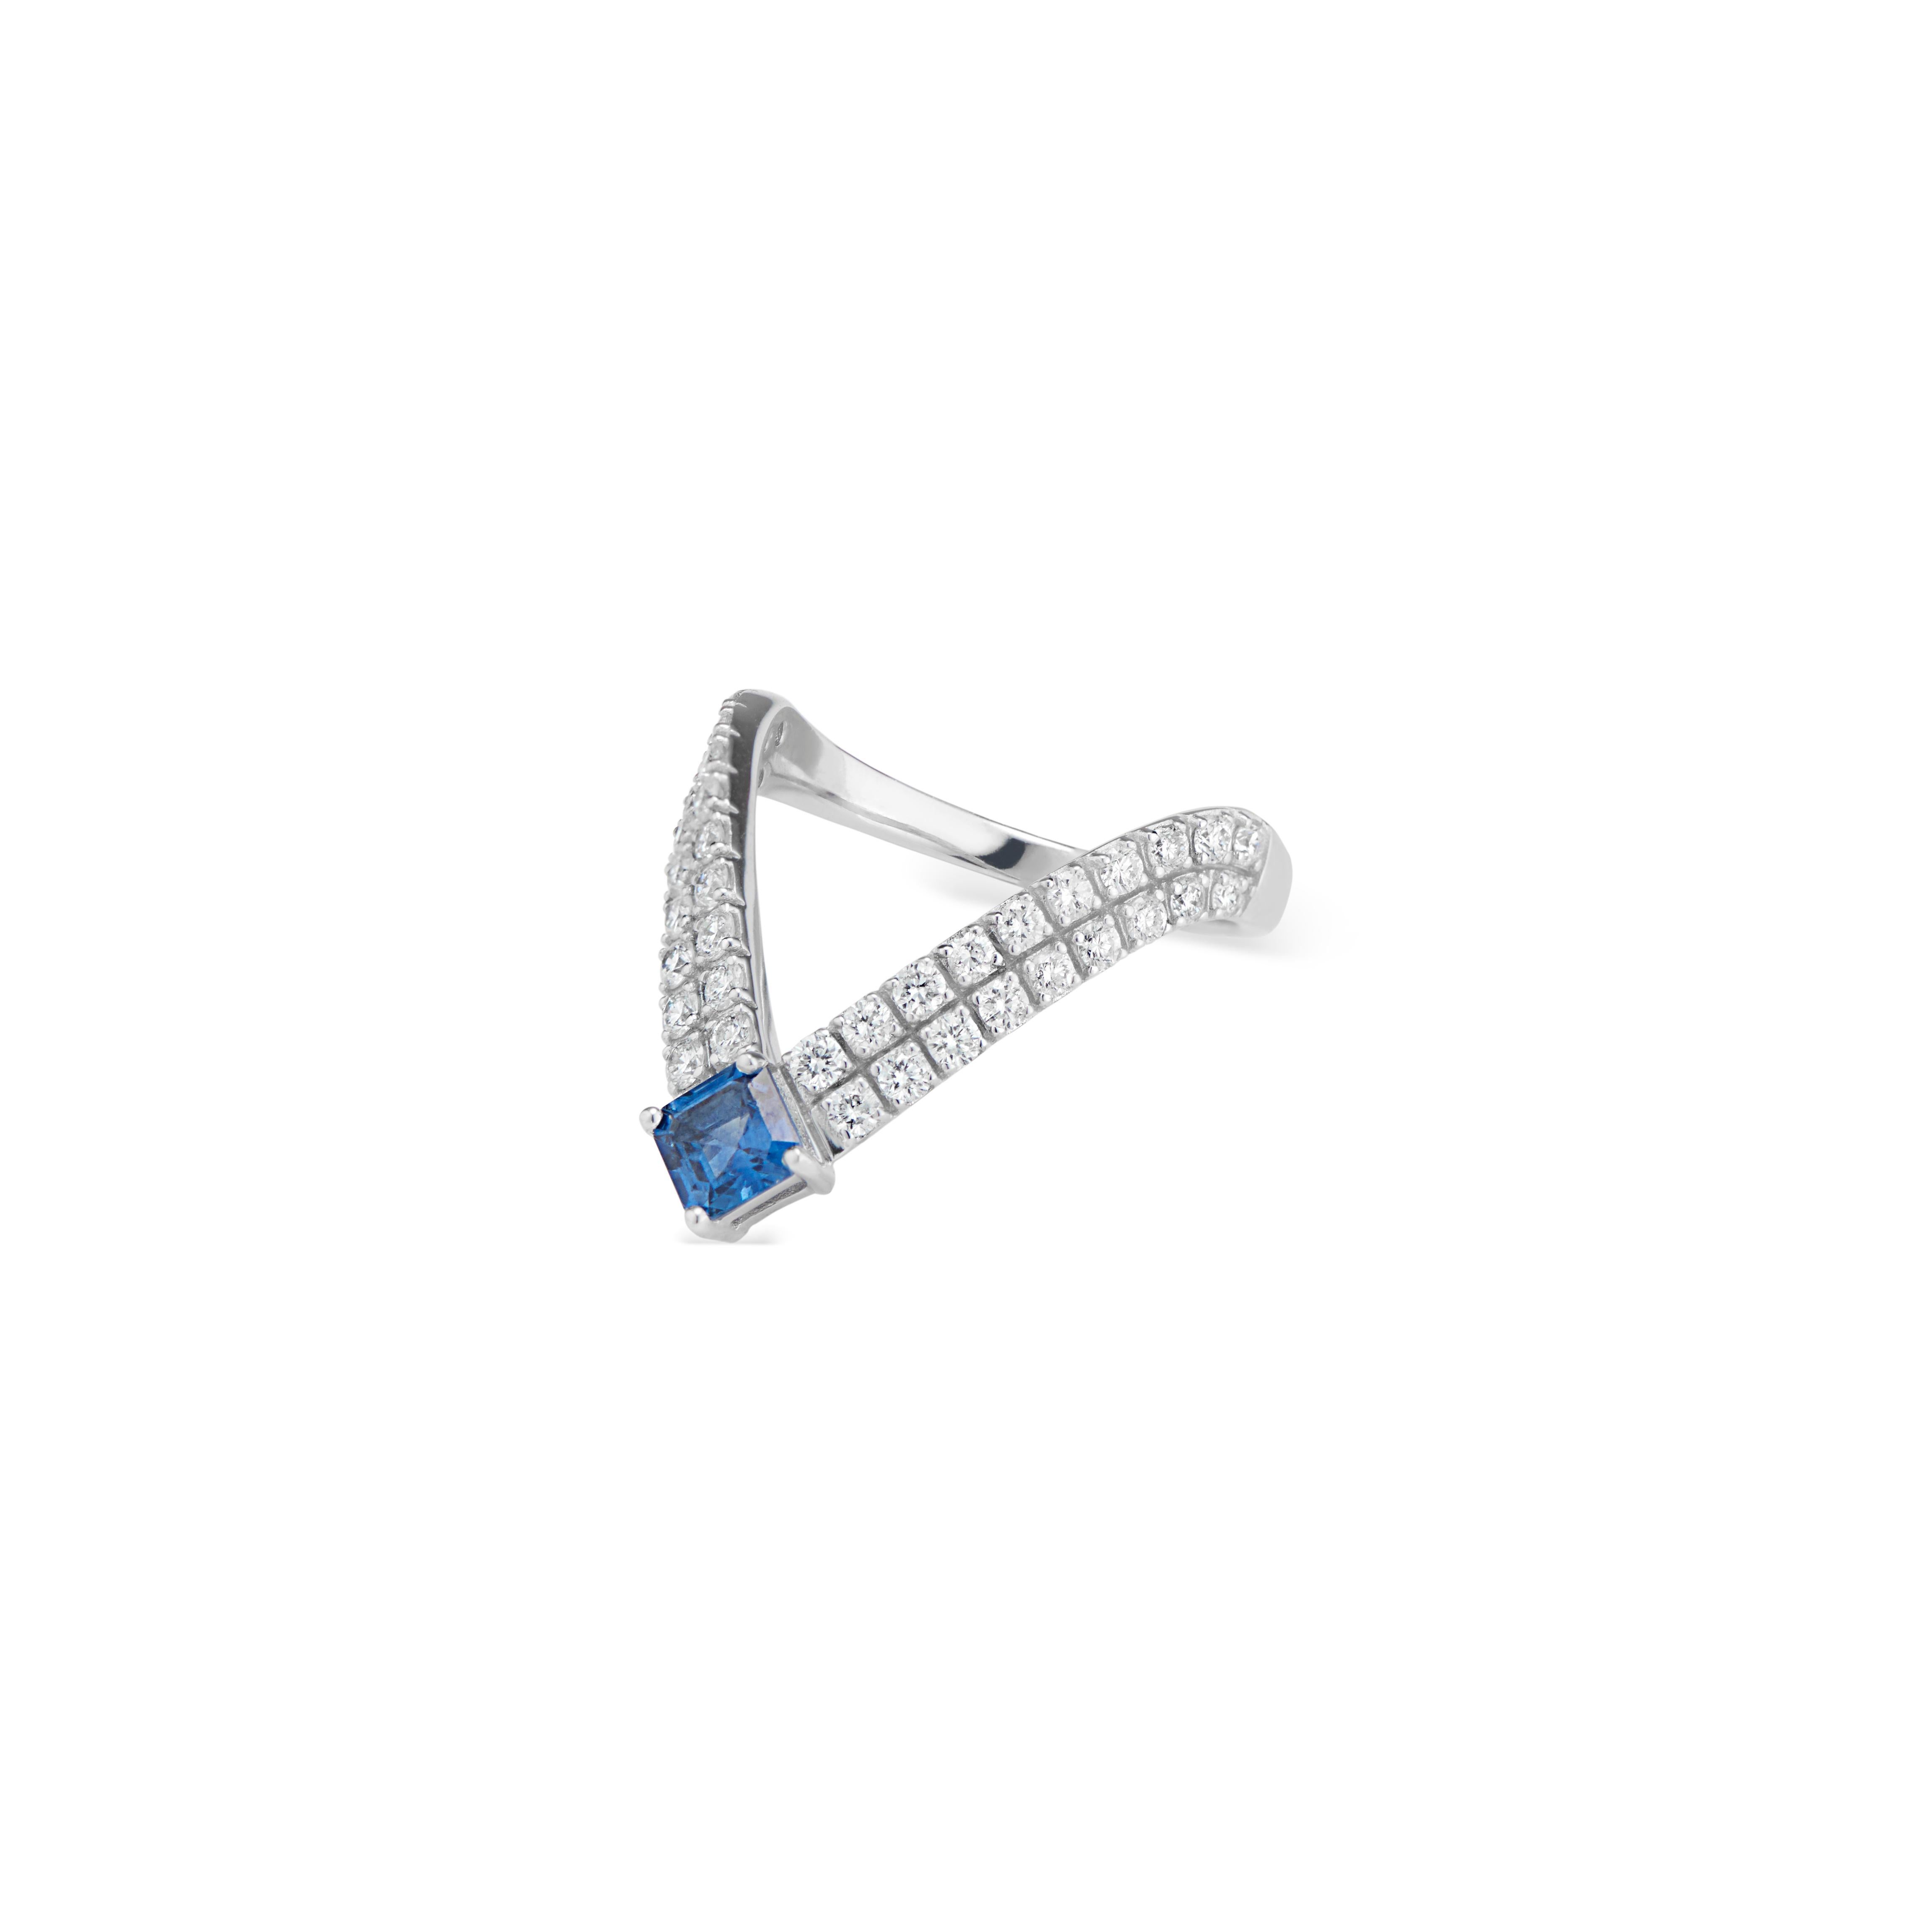 Tiara Diamond and Blue Sapphire Ring set in 14k white gold, 0.77 ctw of brilliant cut diamonds and 0.54 ct Blue Sapphire.

Size 6.5


